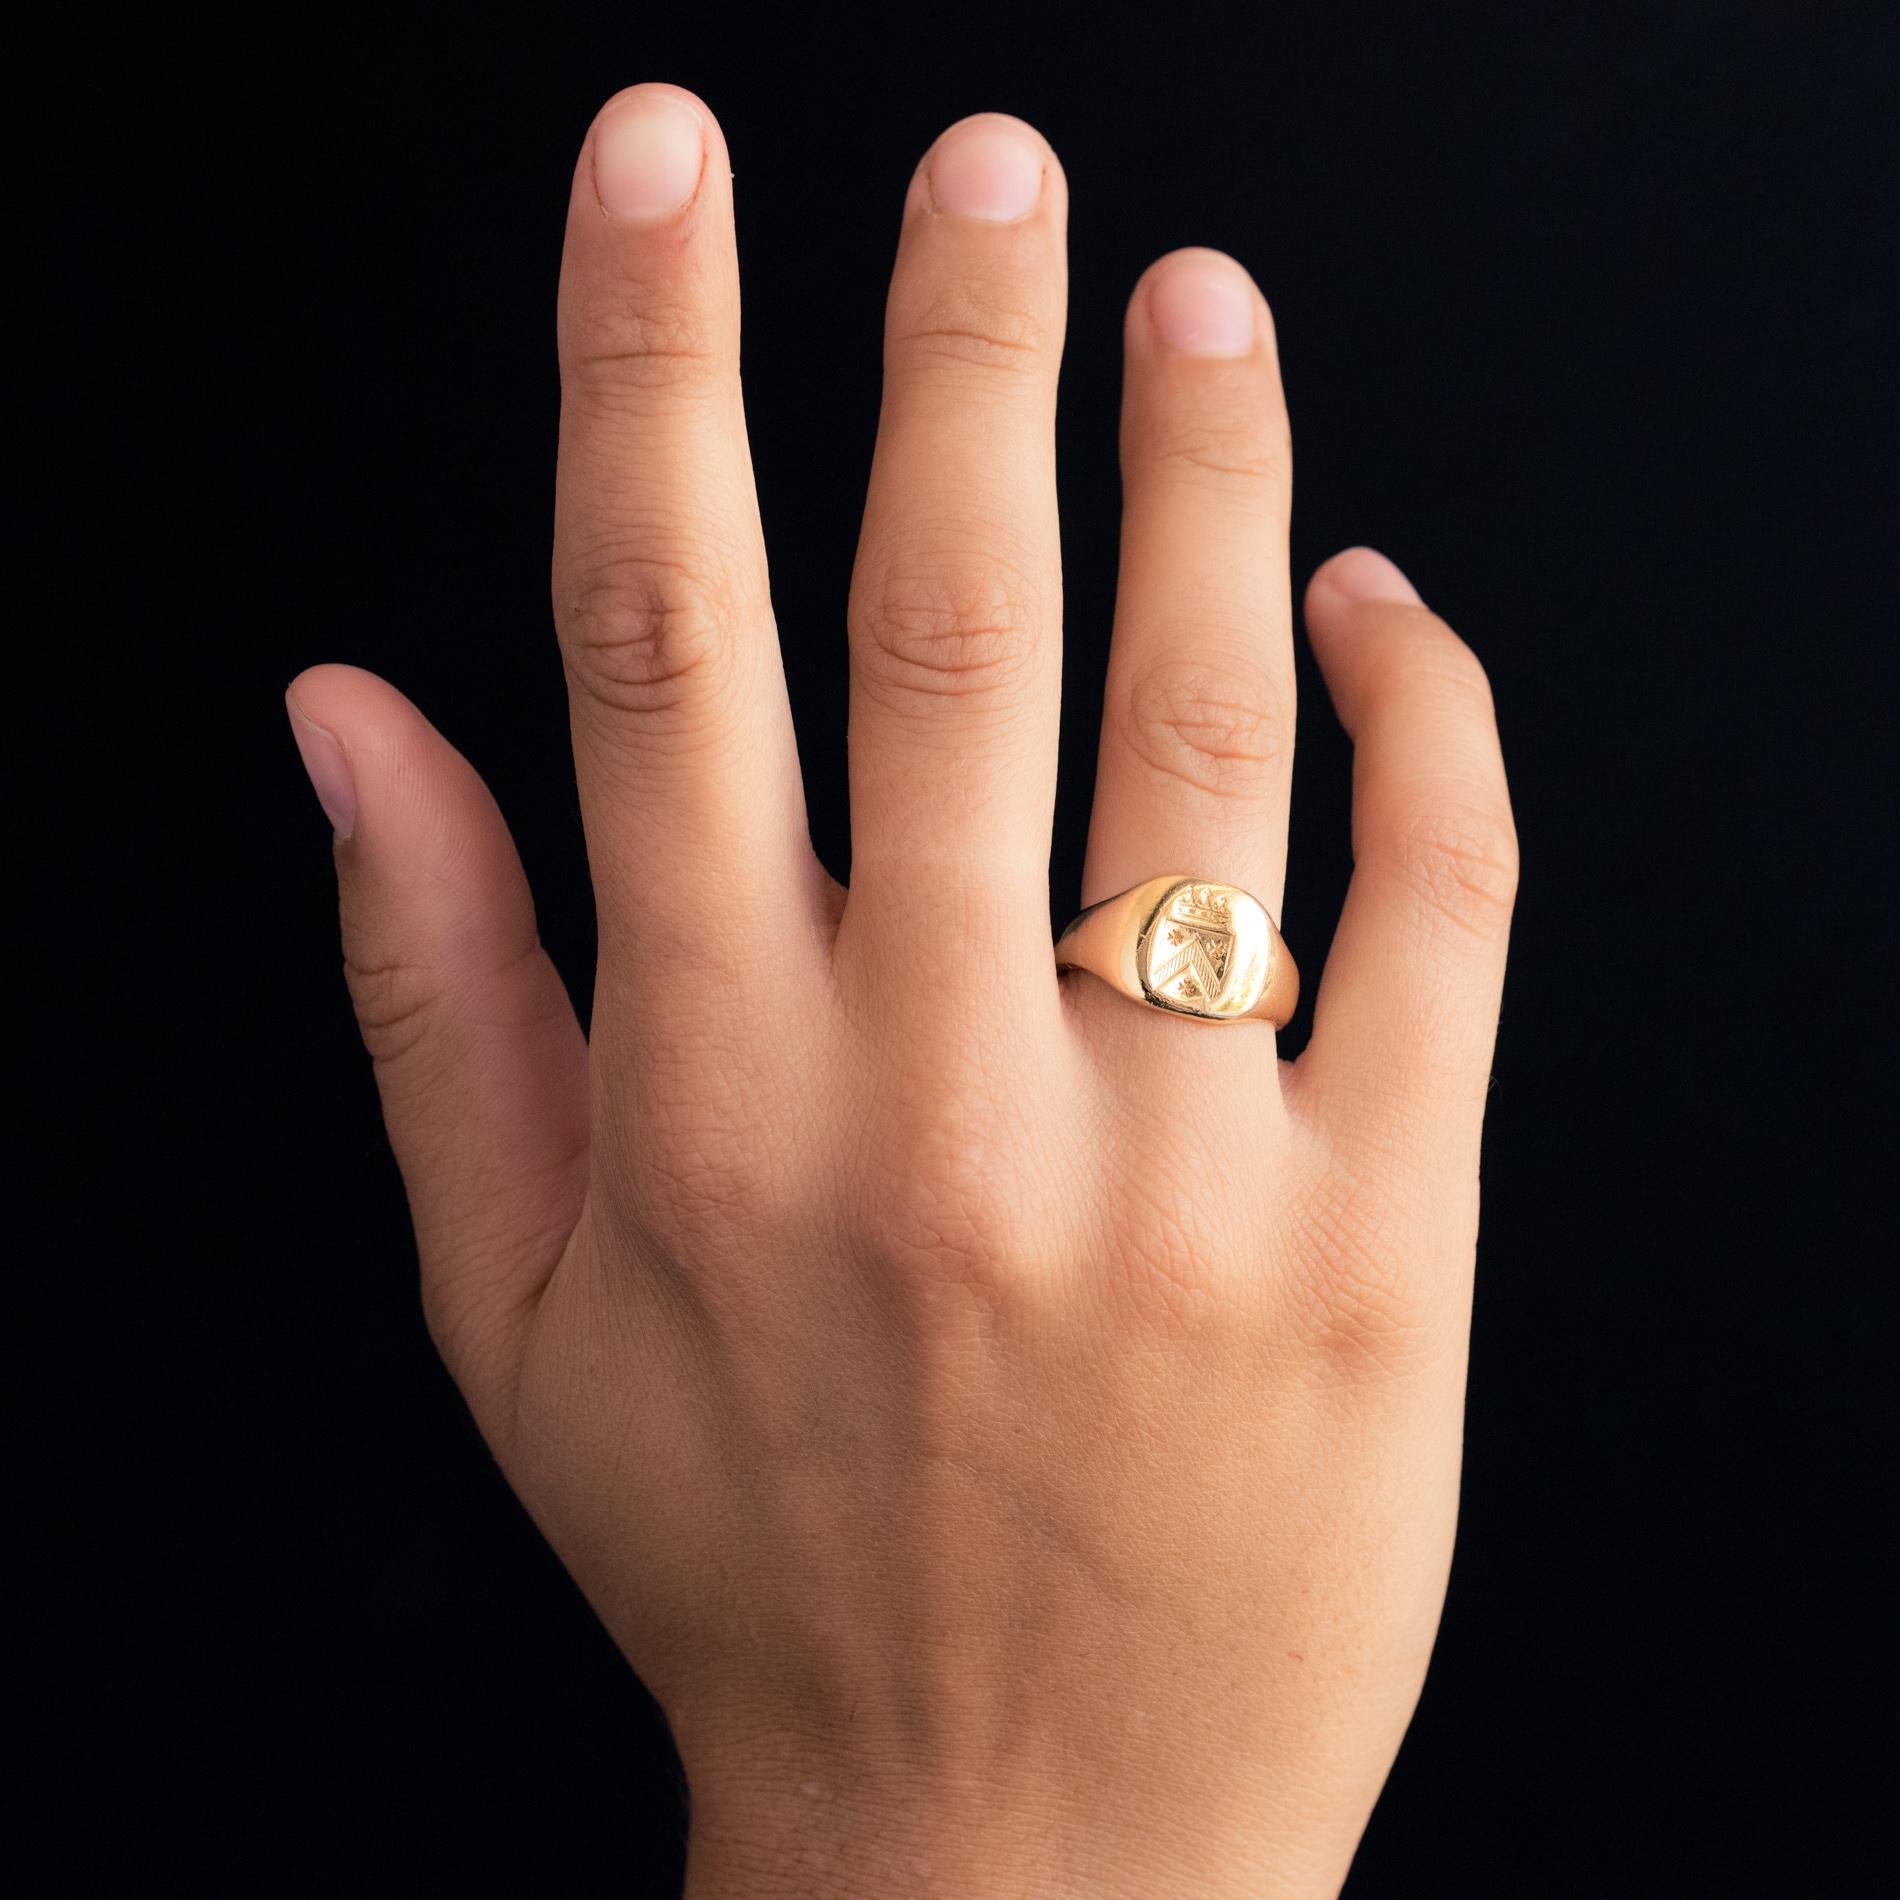 Signet ring in 18 karat yellow gold.
This signet ring is adorned with a crowned, chiselled coat of arms.
Height : 12 mm, width : 12.7 mm, thickness : 1.5 mm, width at the base of the ring: 4.4 mm.
Total weight of the jewel : approximately 8.6 g.
US